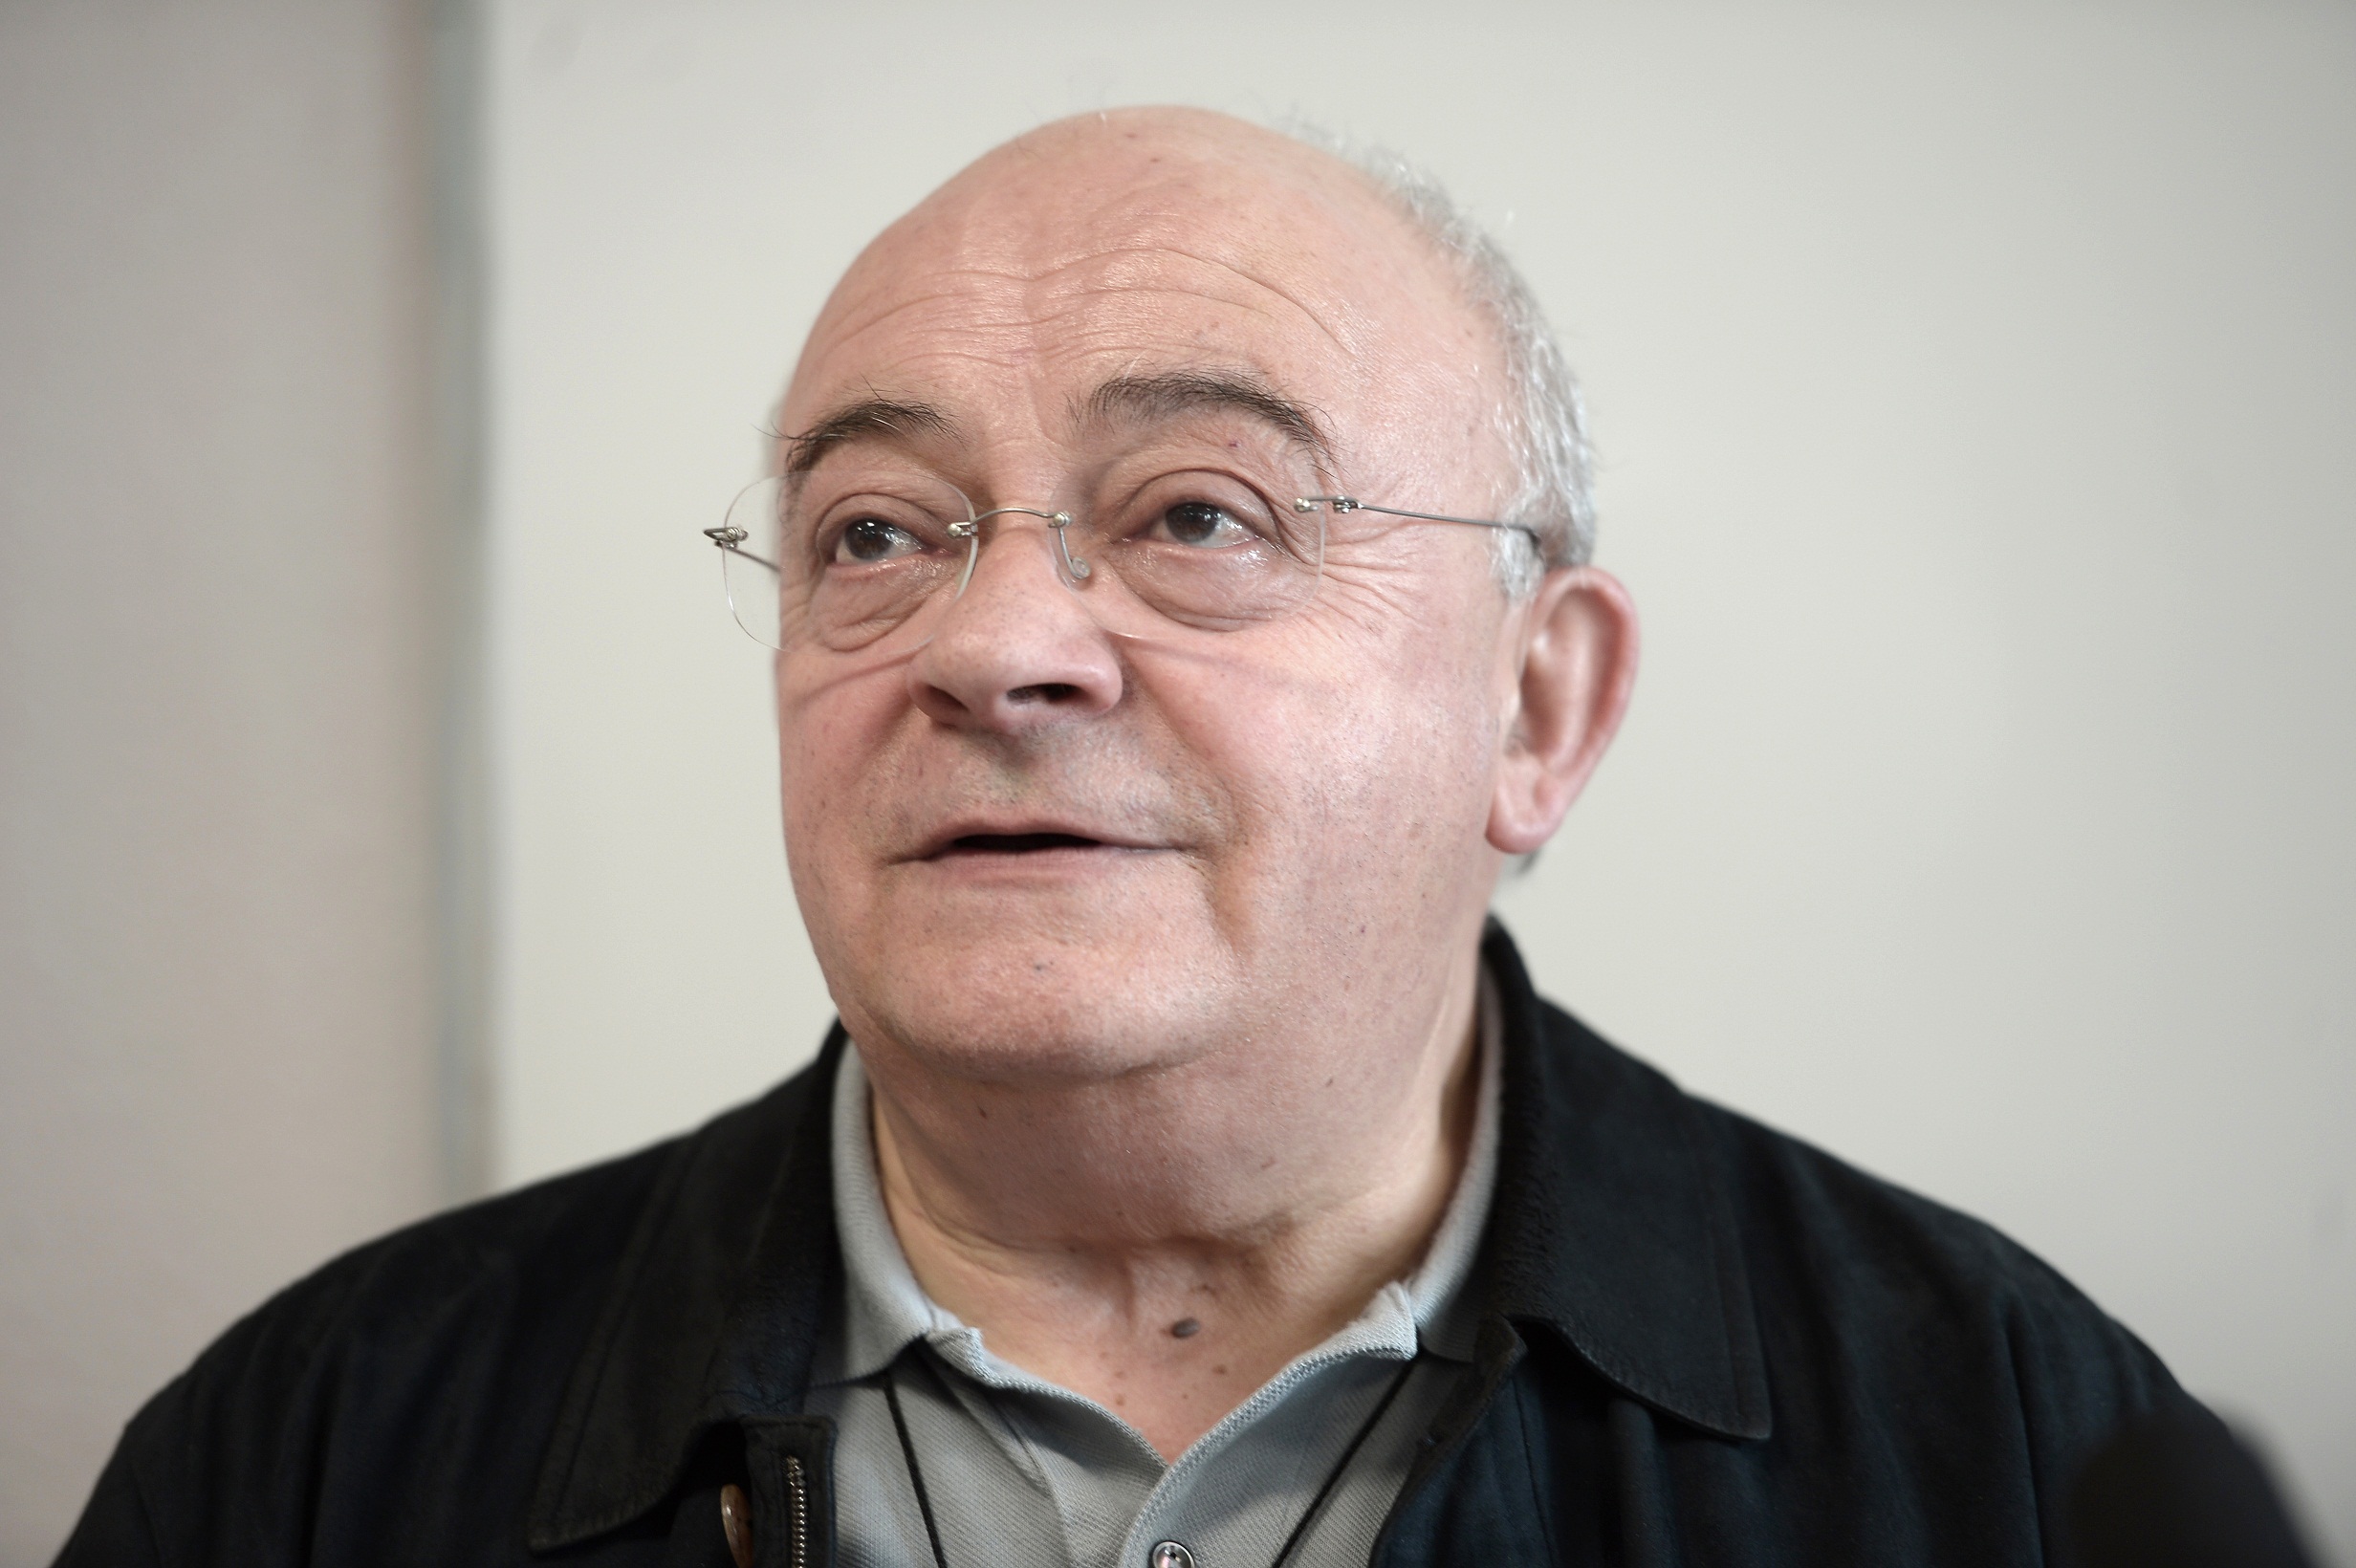 Fathers Bernard Hayet delivers a press conference at the diocese of Dax on April 6, 2017, after the resignation of a French bishop over "inappropriate behaviour" towards youths. A French bishop resigned on April 6 at the behest of the Vatican over "inappropriate behaviour" towards youths, just weeks after complaints came to the attention of his diocese. Herve Gaschignard, 57, bishop of the southwest diocese of Dax, tendered his resignation at the suggestion of the Vatican's envoy to France, Archbishop Luigi Ventura, the French Catholic Church said in a statement.   / AFP PHOTO / IROZ GAIZKA